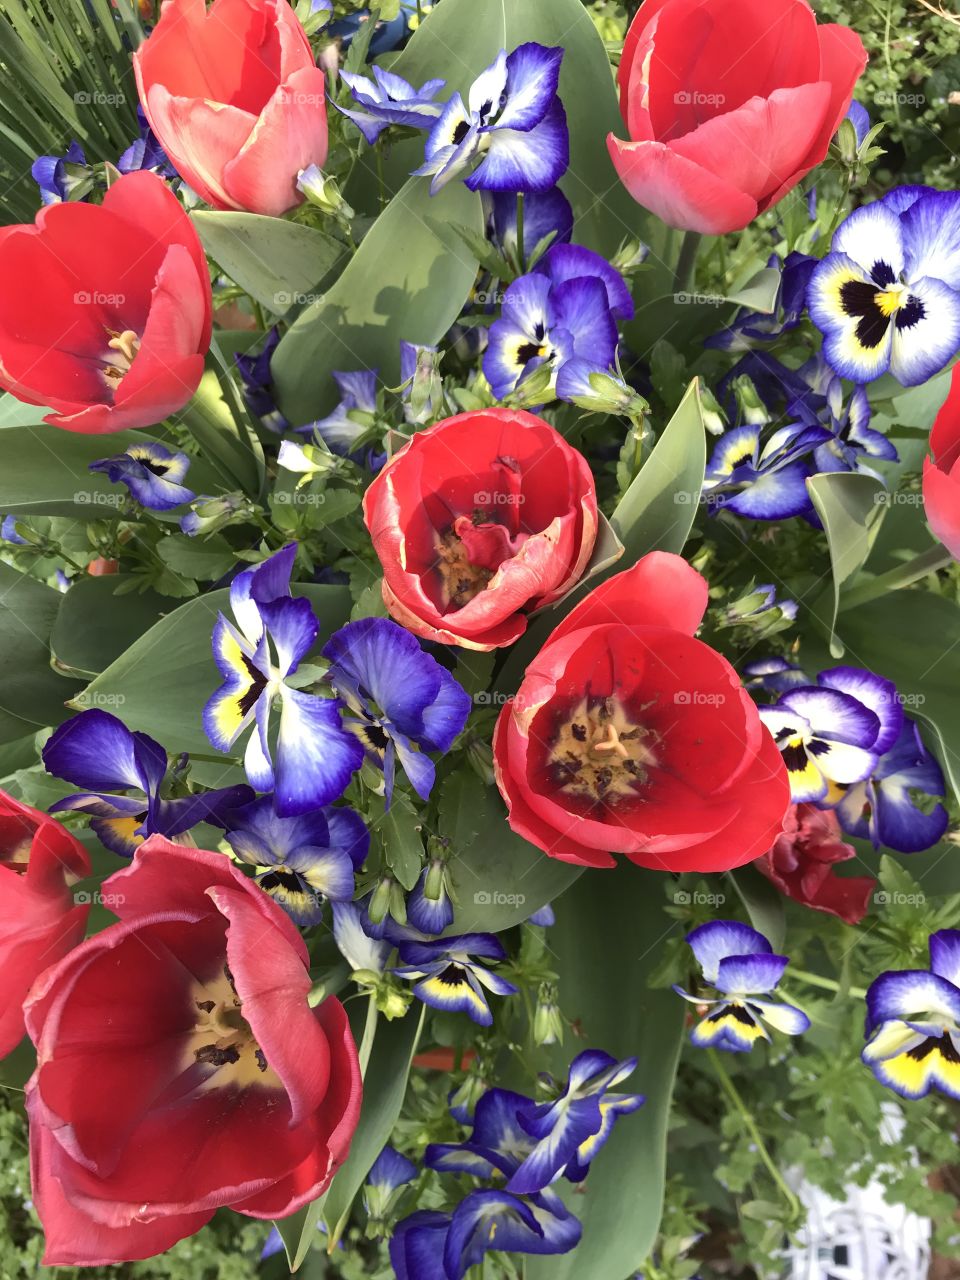 Red tulips and purple pansies 